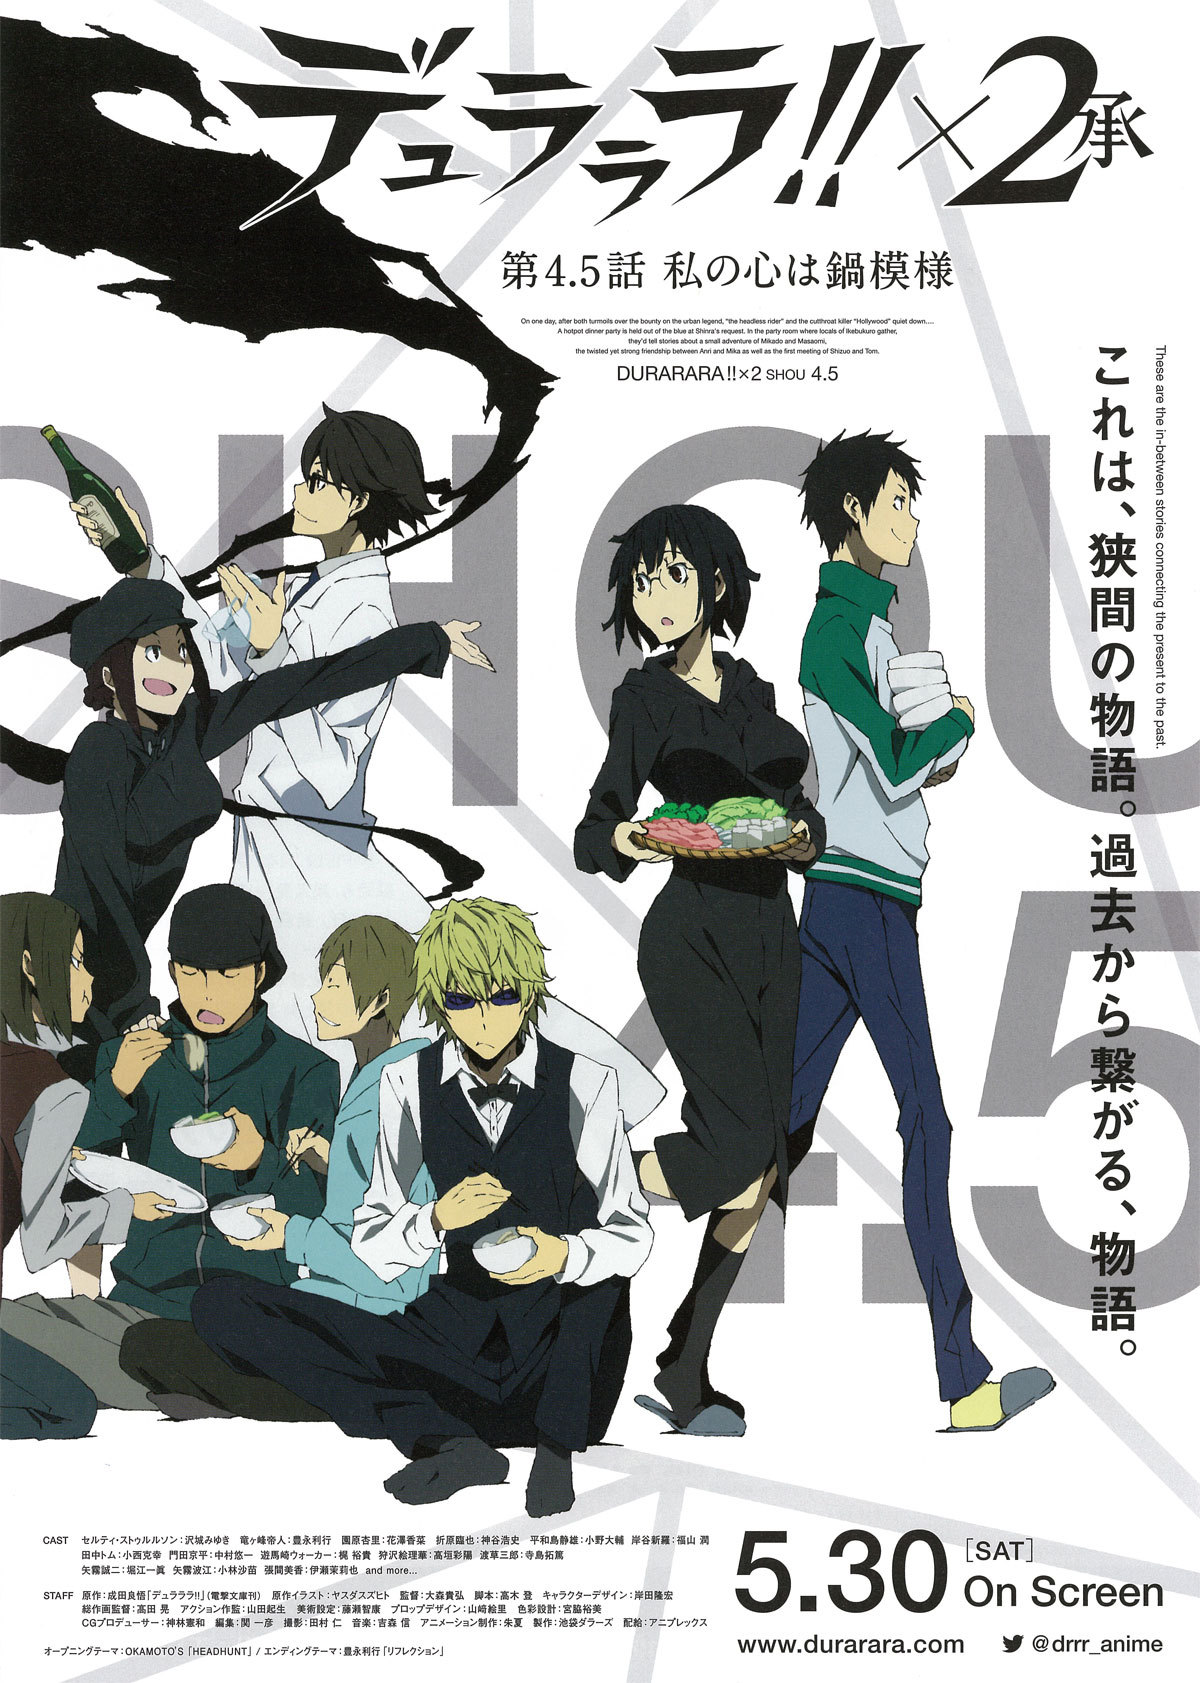 Exclusive And Official Anime Merchandise Meganeko Co Durarara X2 Episode 4 5 My Heart Is Like A